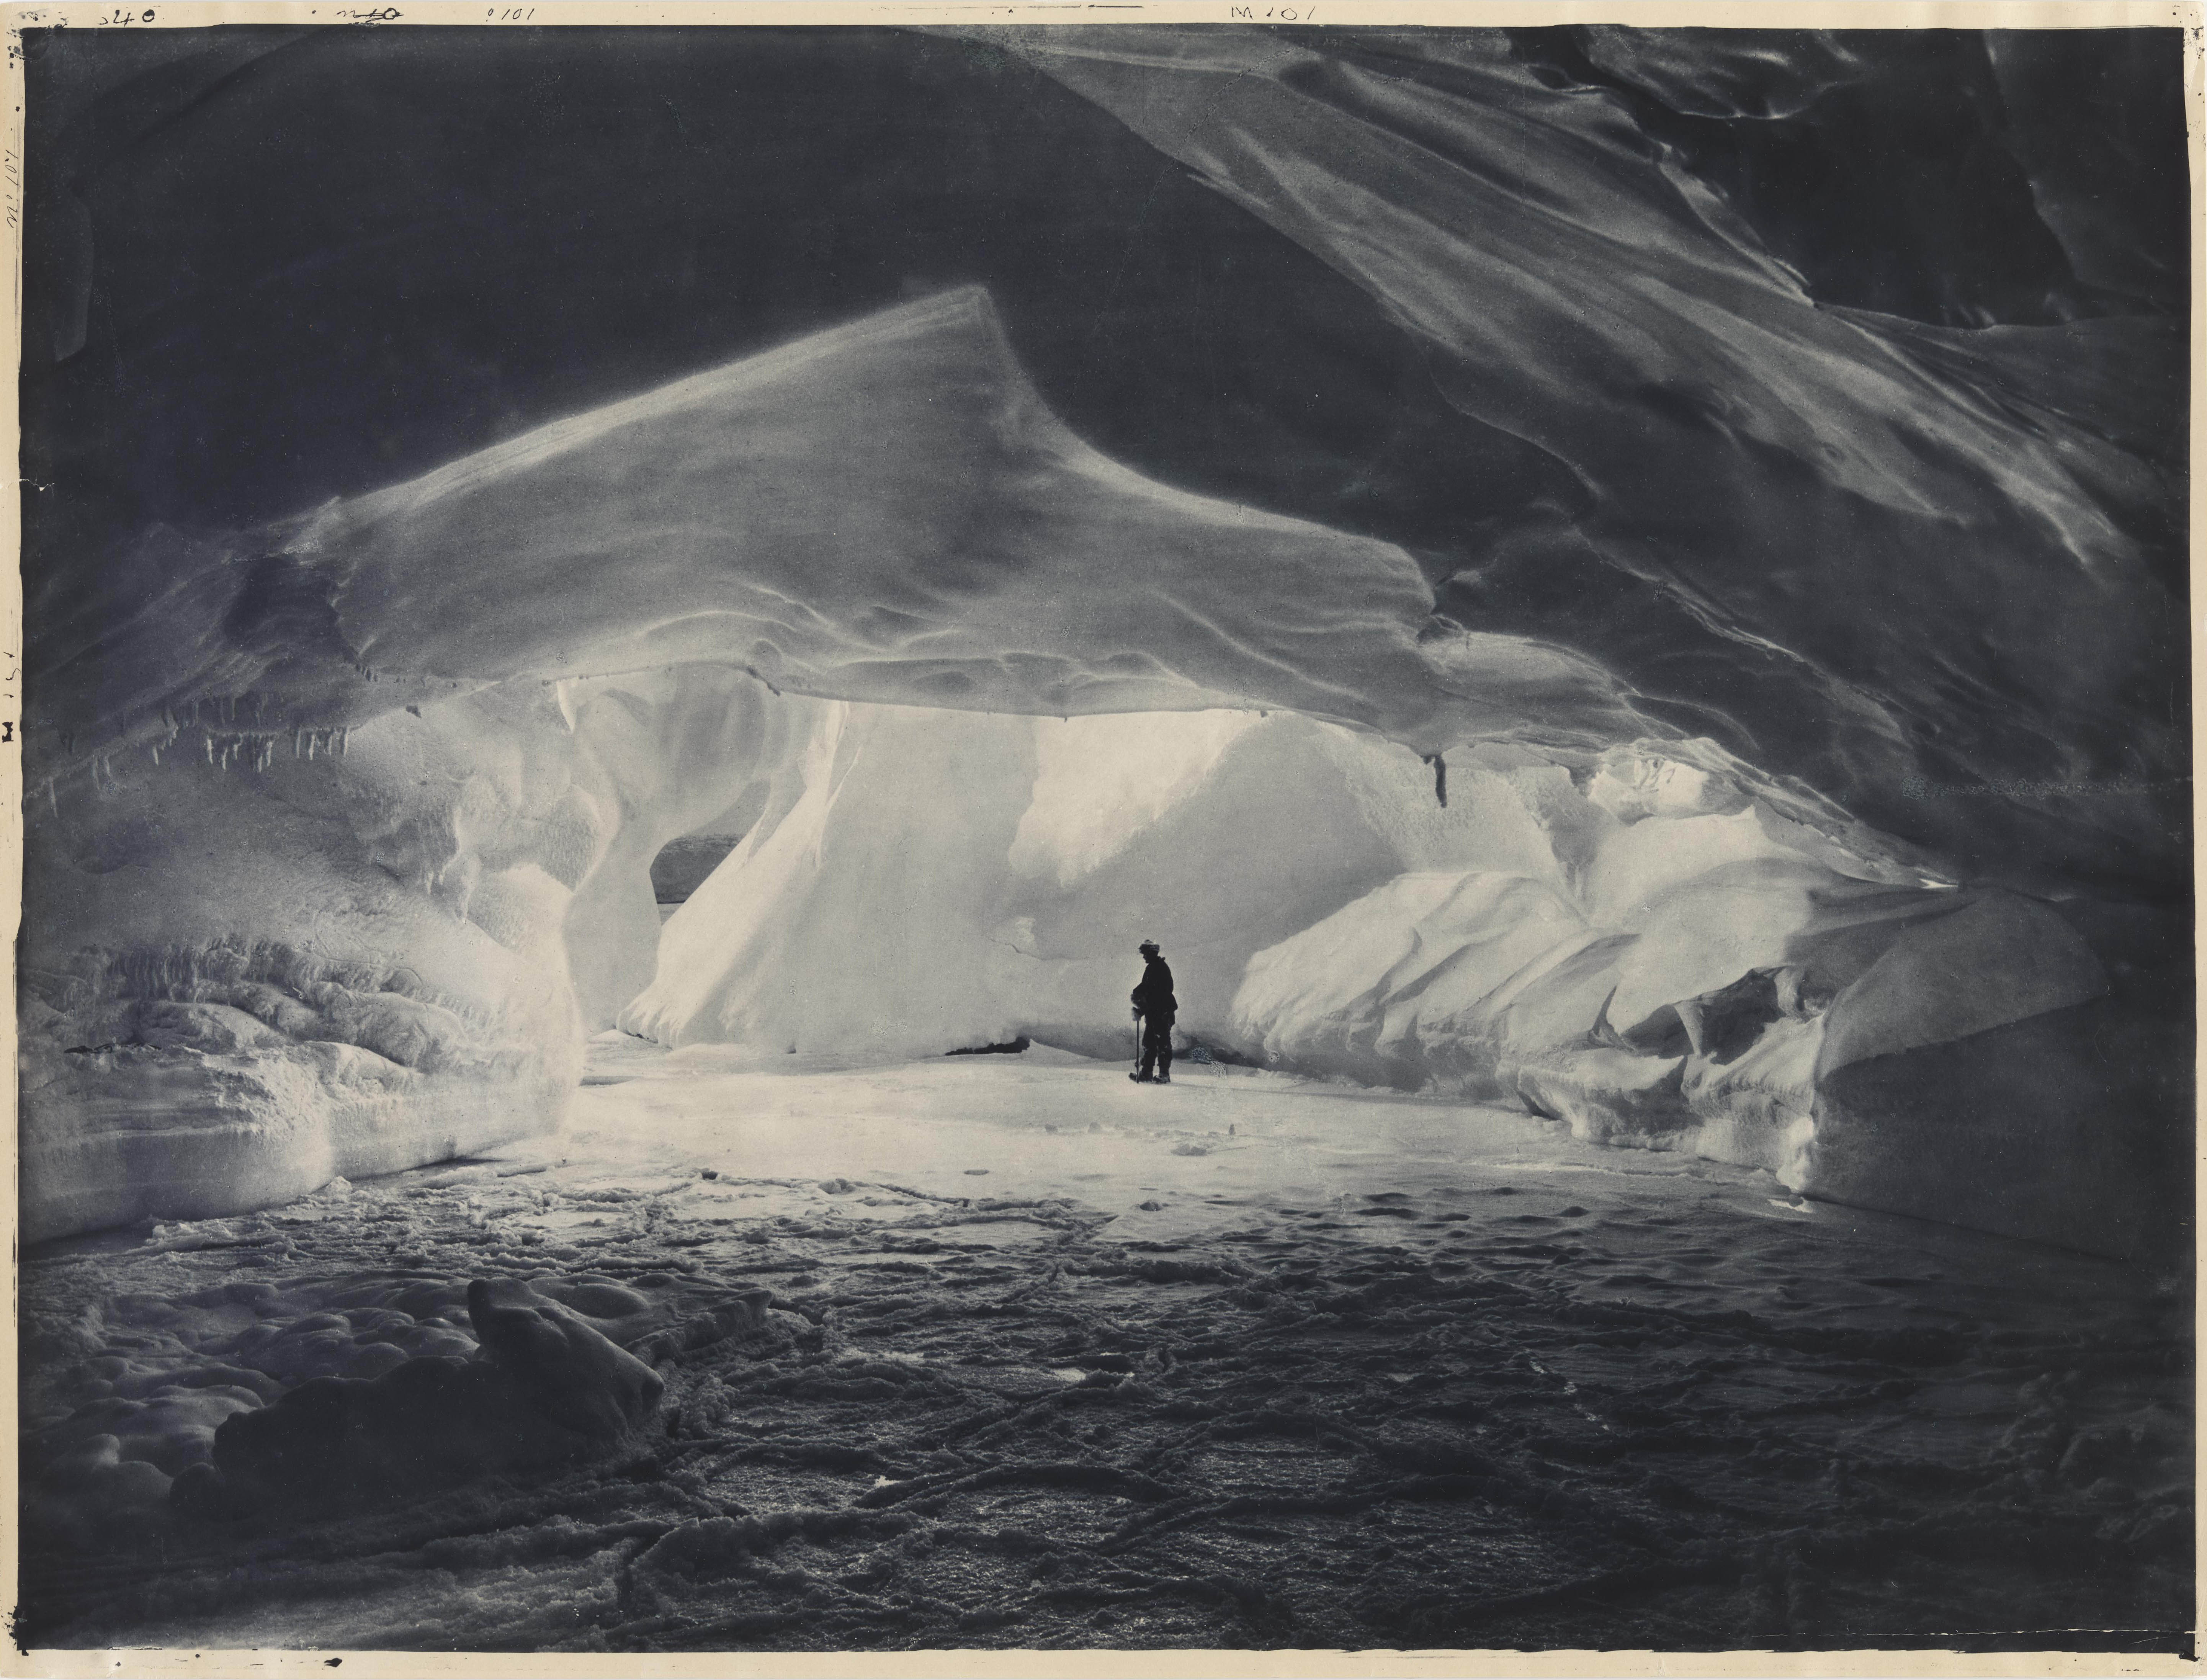 Frank Hurley :: A man (Leslie H. Whetter?) stands in a cavern carved by the sea in an ice wall near Commonwealth Bay, 1911-1914. Silver gelatin photoprint. From: Australasian Antarctic Expedition, 1911-1914 : original pictorial material reproduced in the `Scientific reports'. | src State Library of New South Wales website & its Flickr account